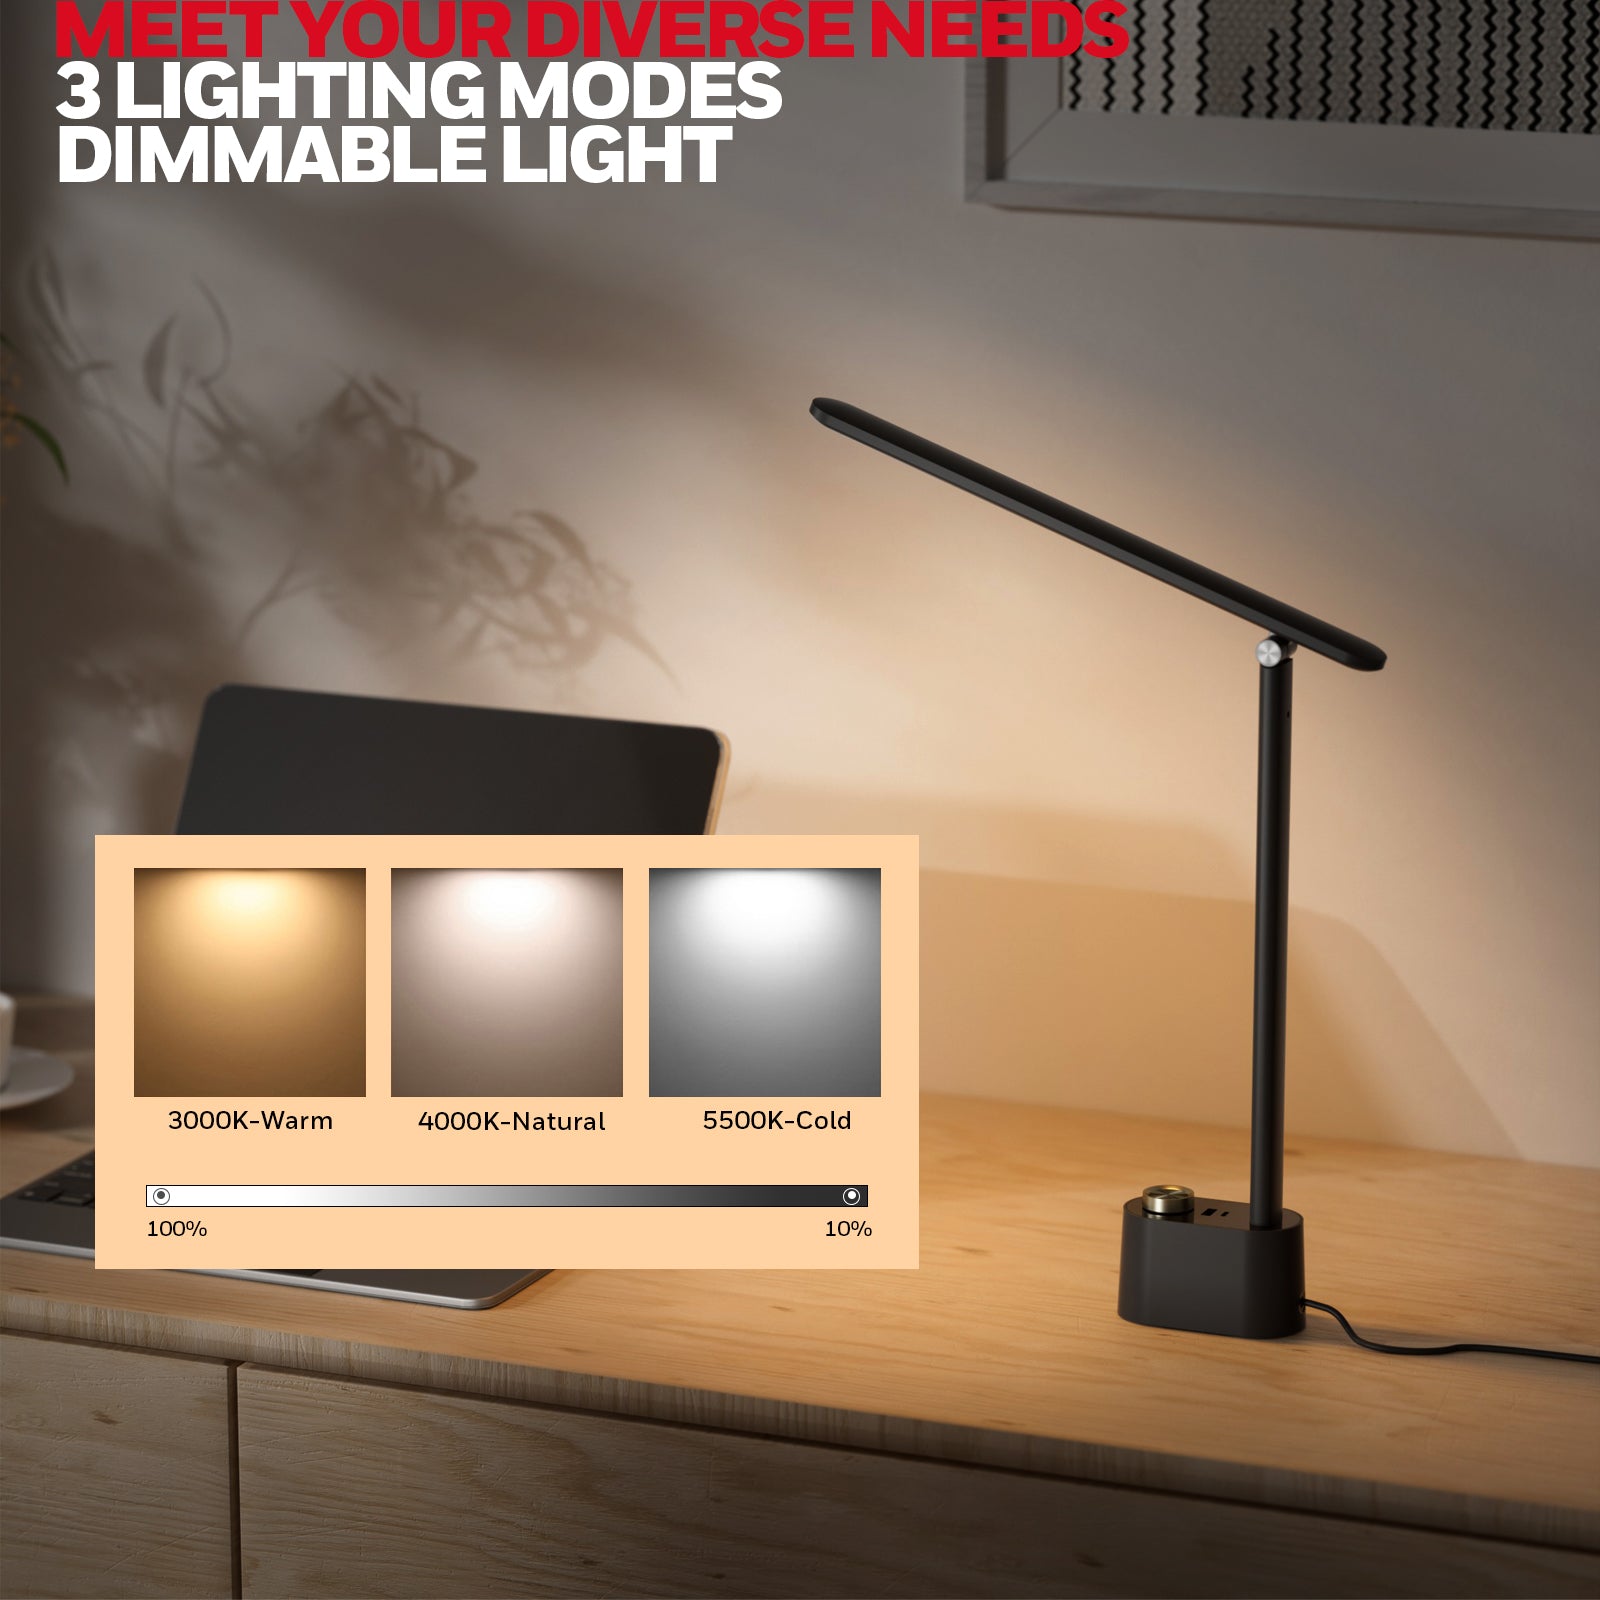 Honeywell Desk Lamp Home Office - Sunturalux™ H01 Eye Caring LED Lighting with USB A+C Charging Station